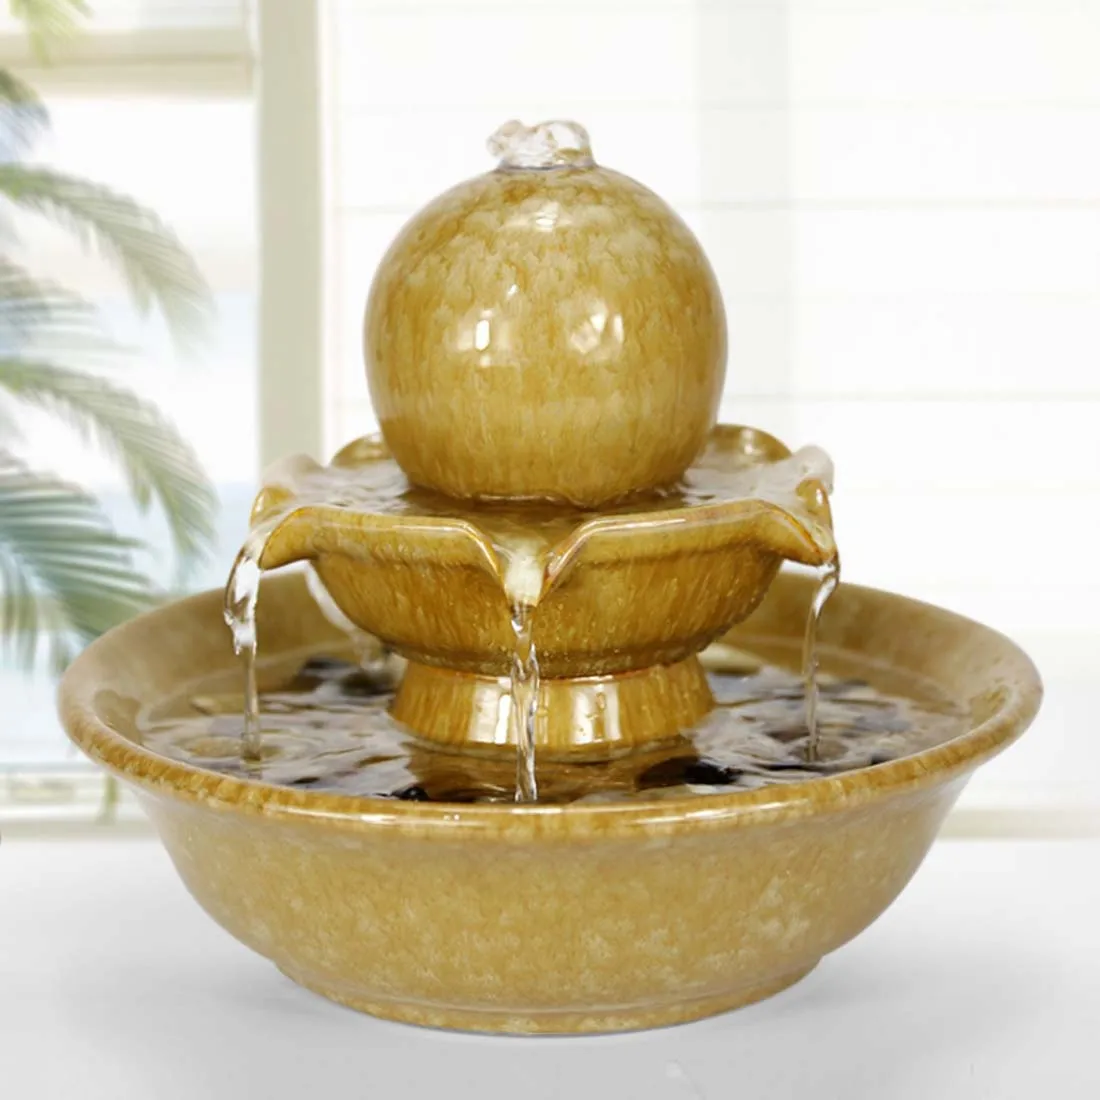 Flowing Water Fengshui Wheel Circulation Fountain Ornaments Humidification Landscape Home Decorations